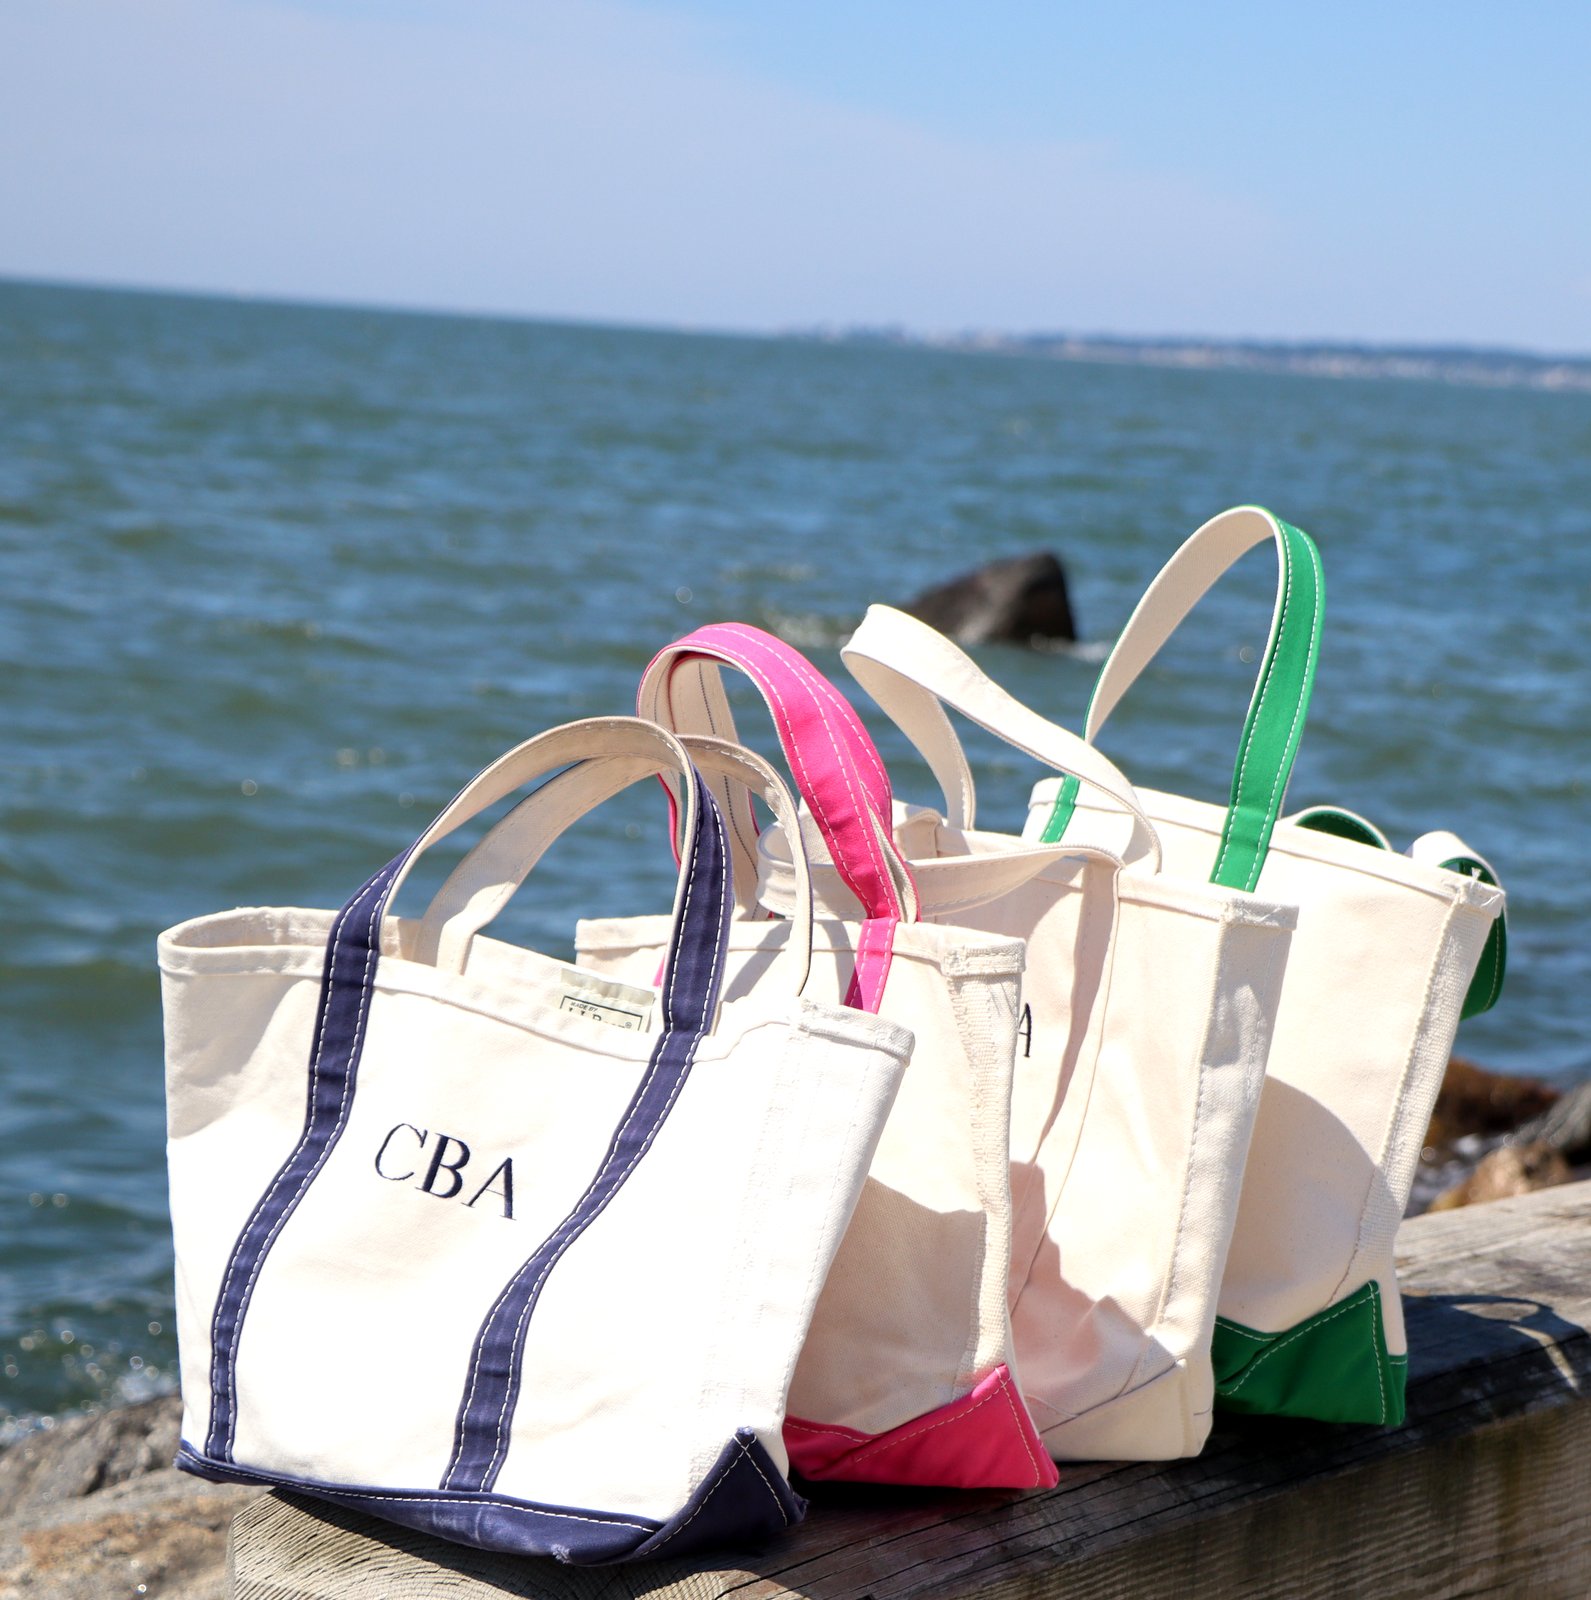 What fits in my small ll bean boat and tote #boatandtote #llbean #llbe